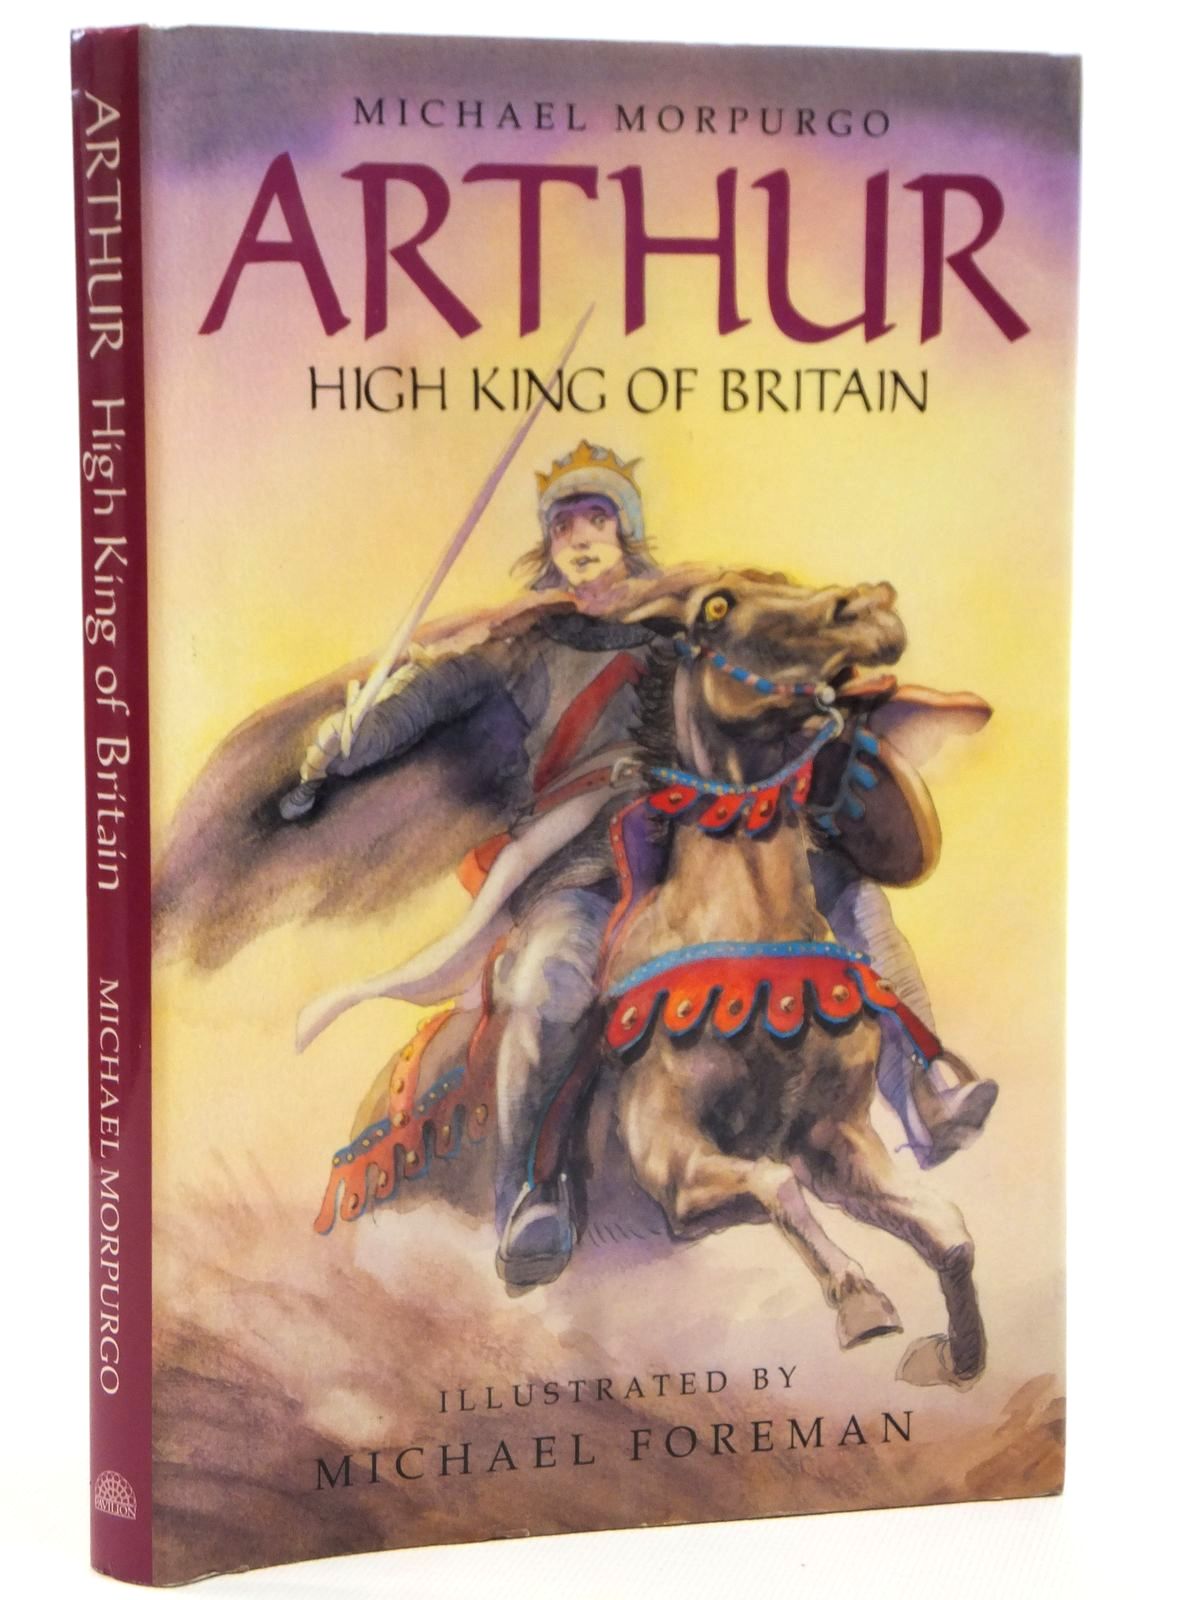 Photo of ARTHUR HIGH KING OF BRITAIN written by Morpurgo, Michael illustrated by Foreman, Michael published by Pavilion Books Ltd. (STOCK CODE: 2121575)  for sale by Stella & Rose's Books